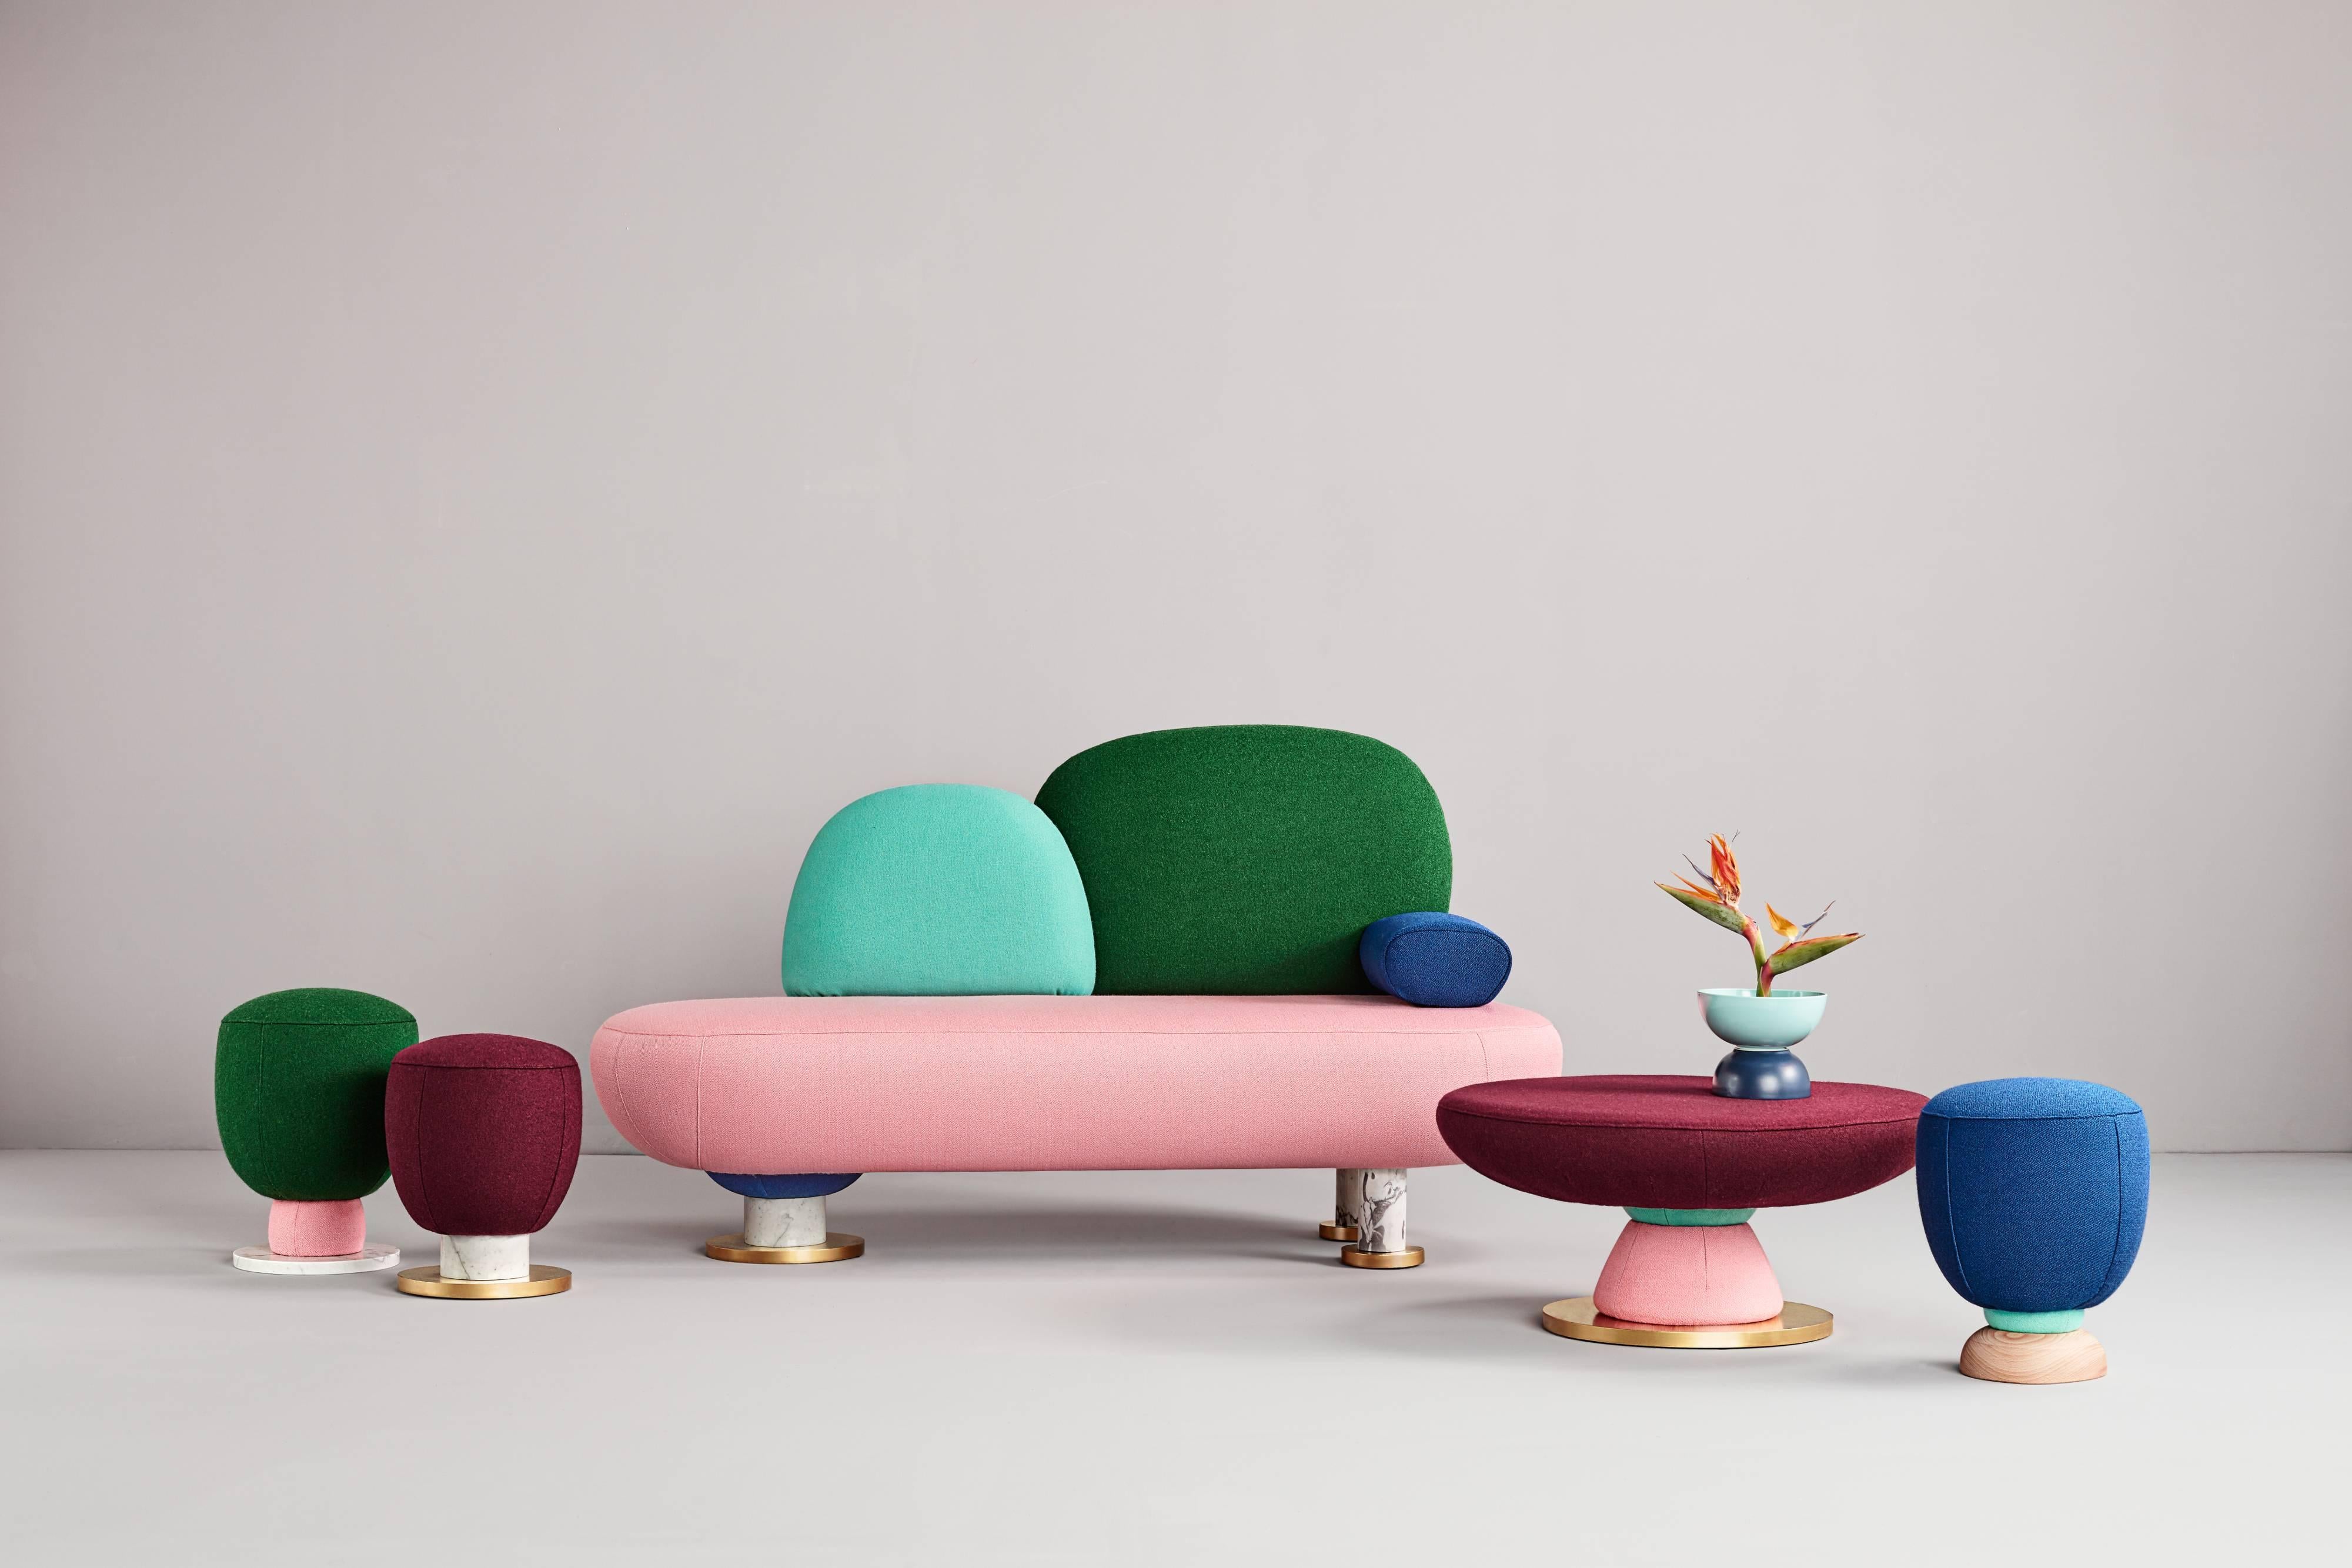 Toadstool collection, green puff by Pepe Albargues

Dimensions and materials:

Large puff: 43 x 37 x 37 cm
Pin and particles board wooden structure.
Fibre coated, polyurethane
3542 seat.
Wooden leg with marble base.

Toadstool collection,